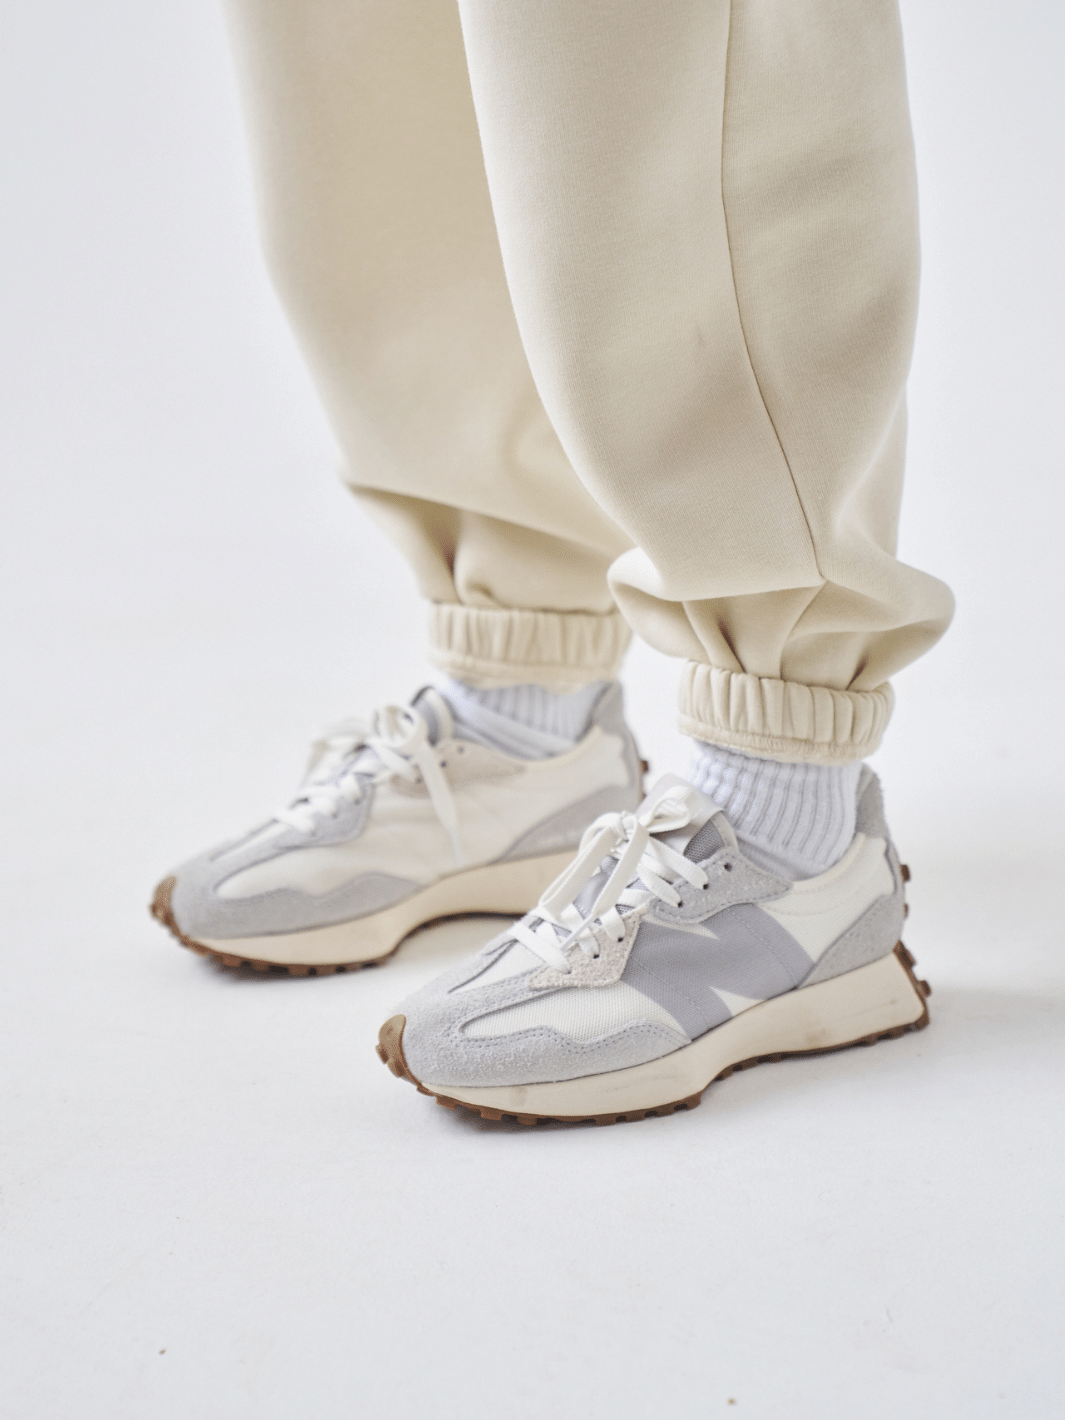 Sian Marie lounge PRE-ORDER Baggy Essential Joggers - Cream